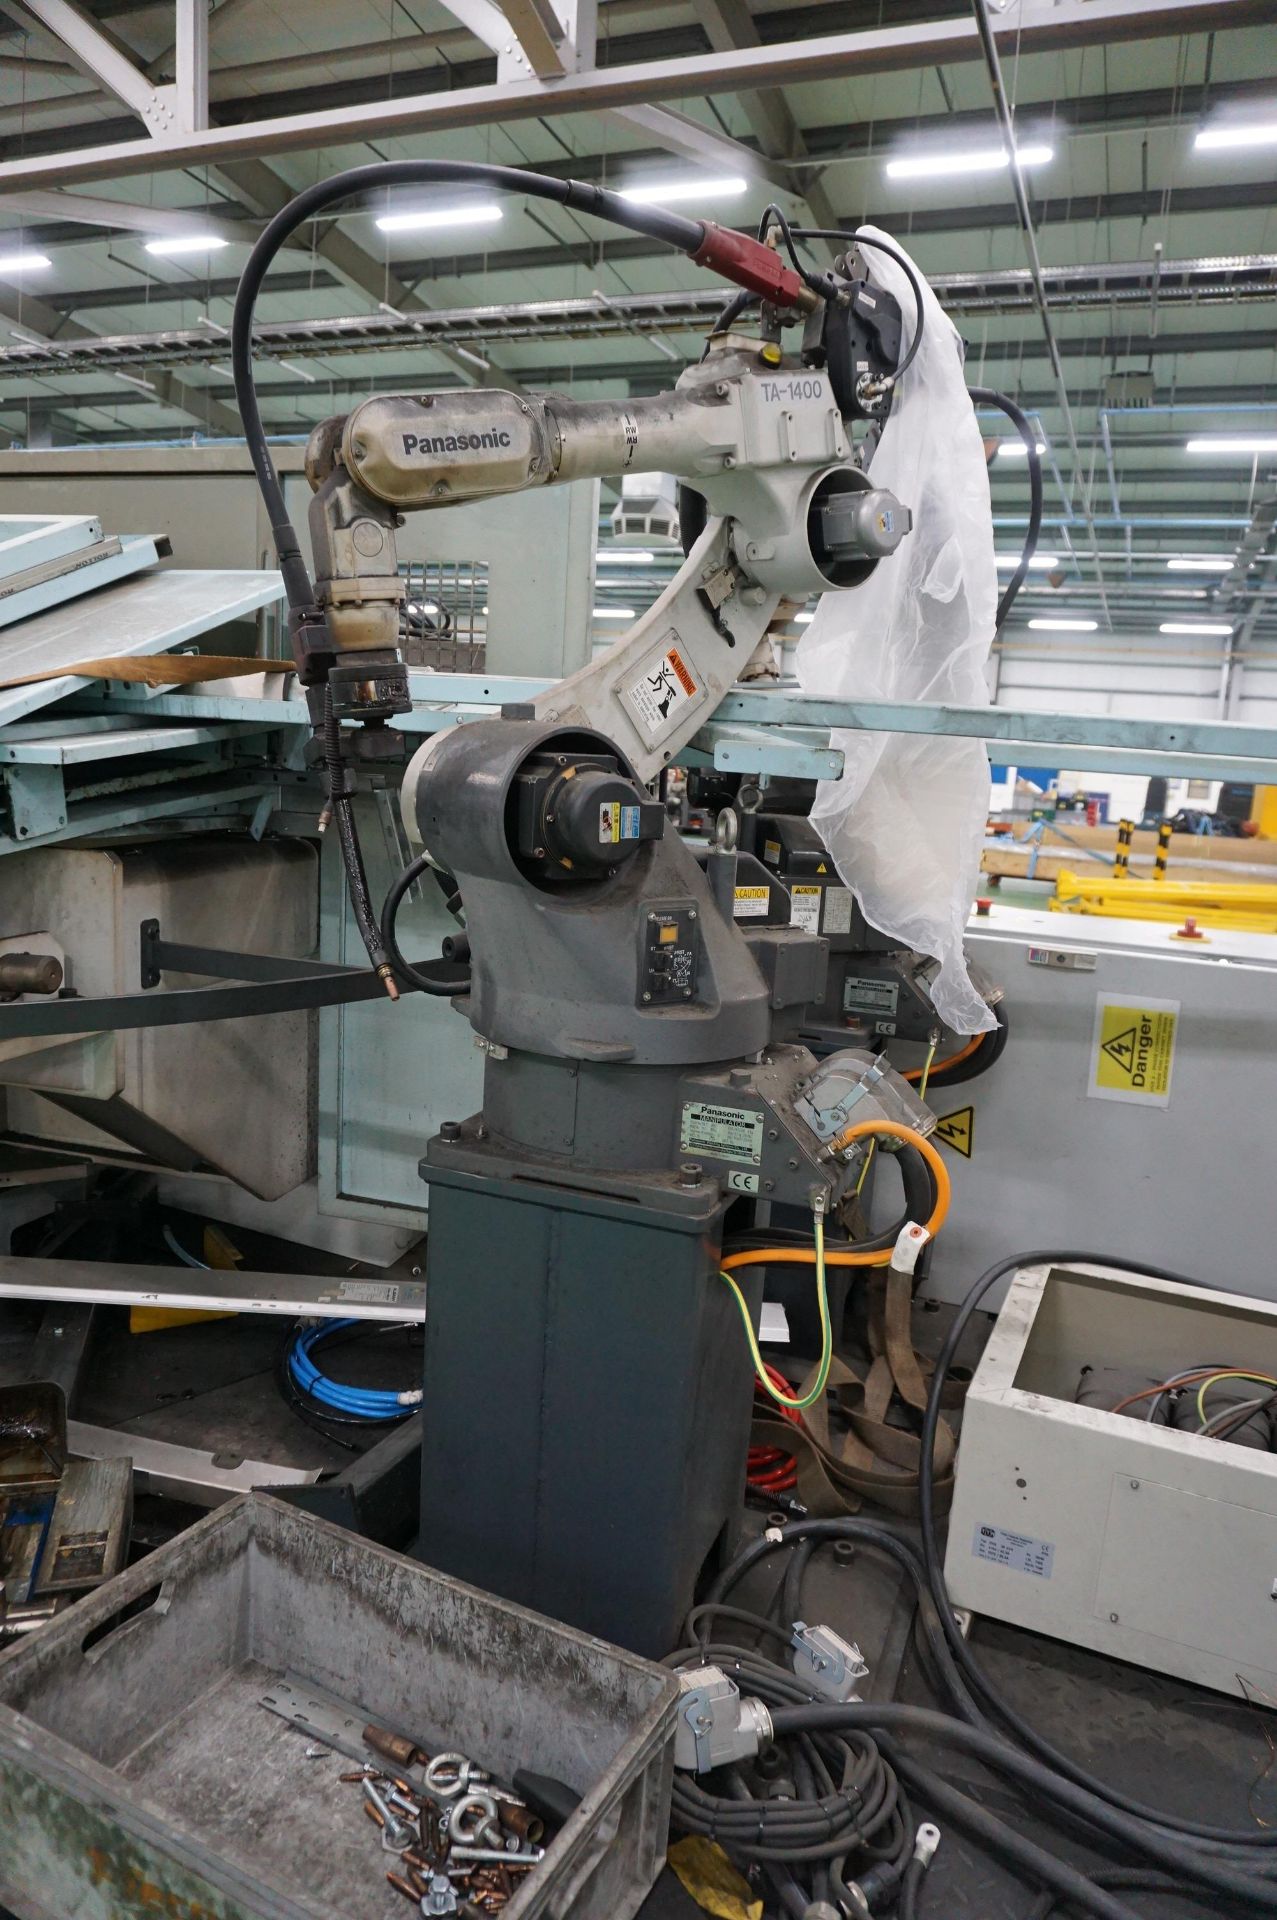 Box frame mounted MiG welding robot cell with 2 x Panasonic TA-1400 G3 6-axis MiG robot welders with - Image 9 of 13